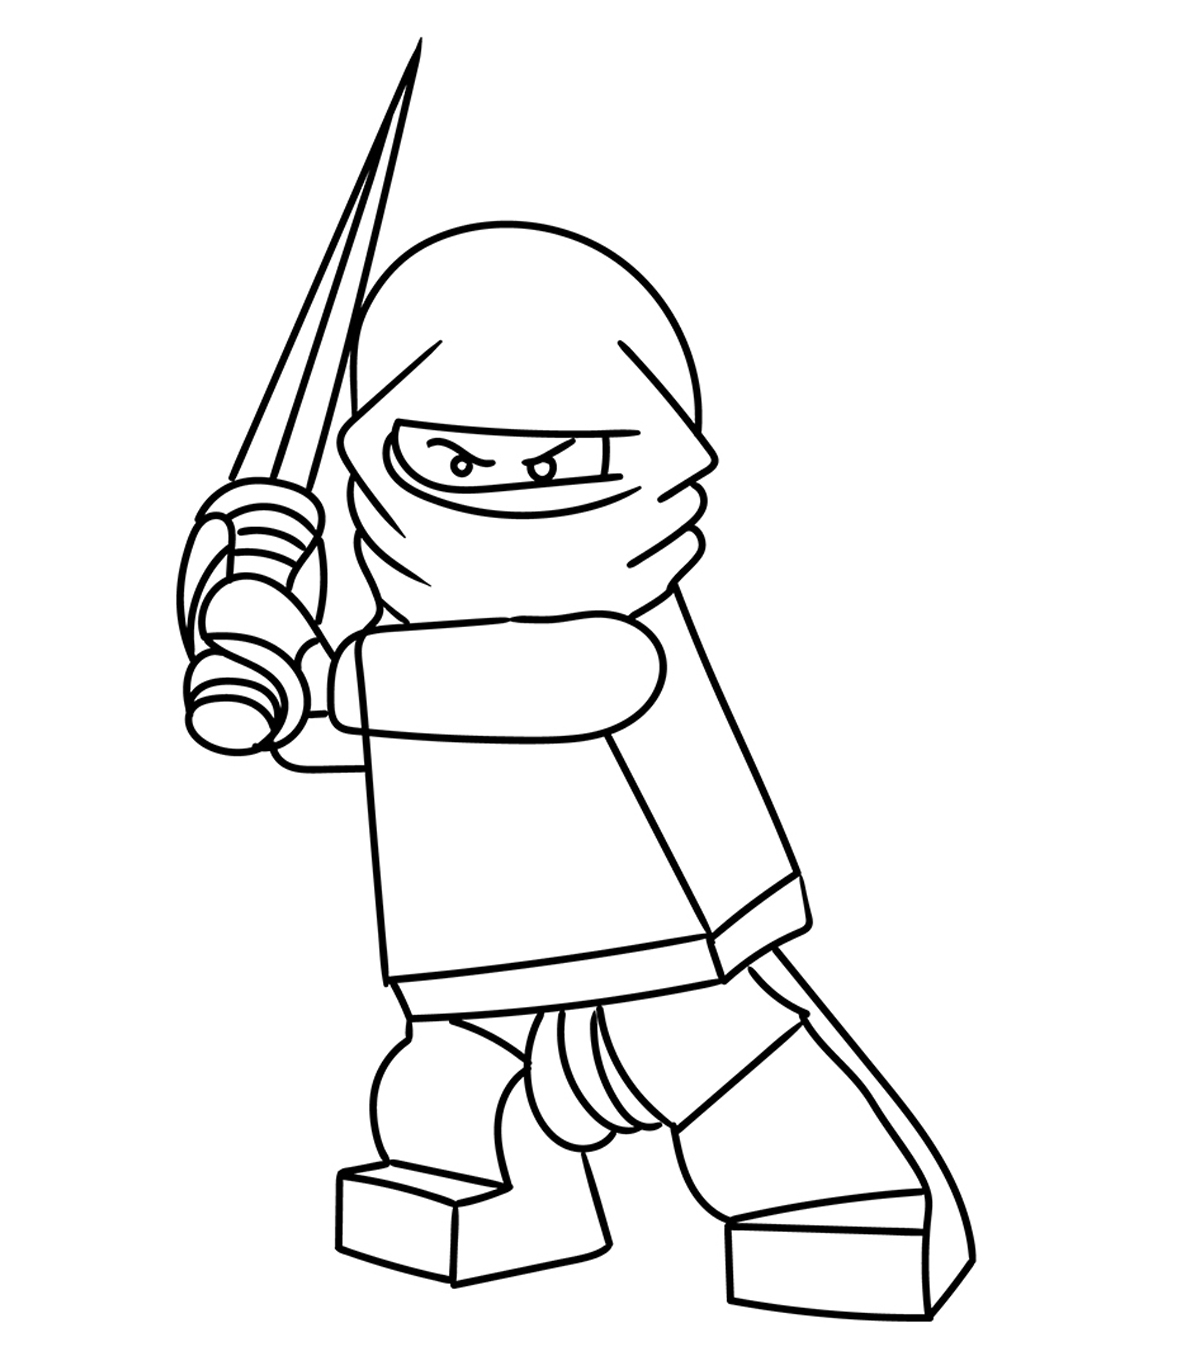 Top 20 Free Printable Ninja Coloring Pages Online - roblox kids coloring book over 15 pages of fun coloring